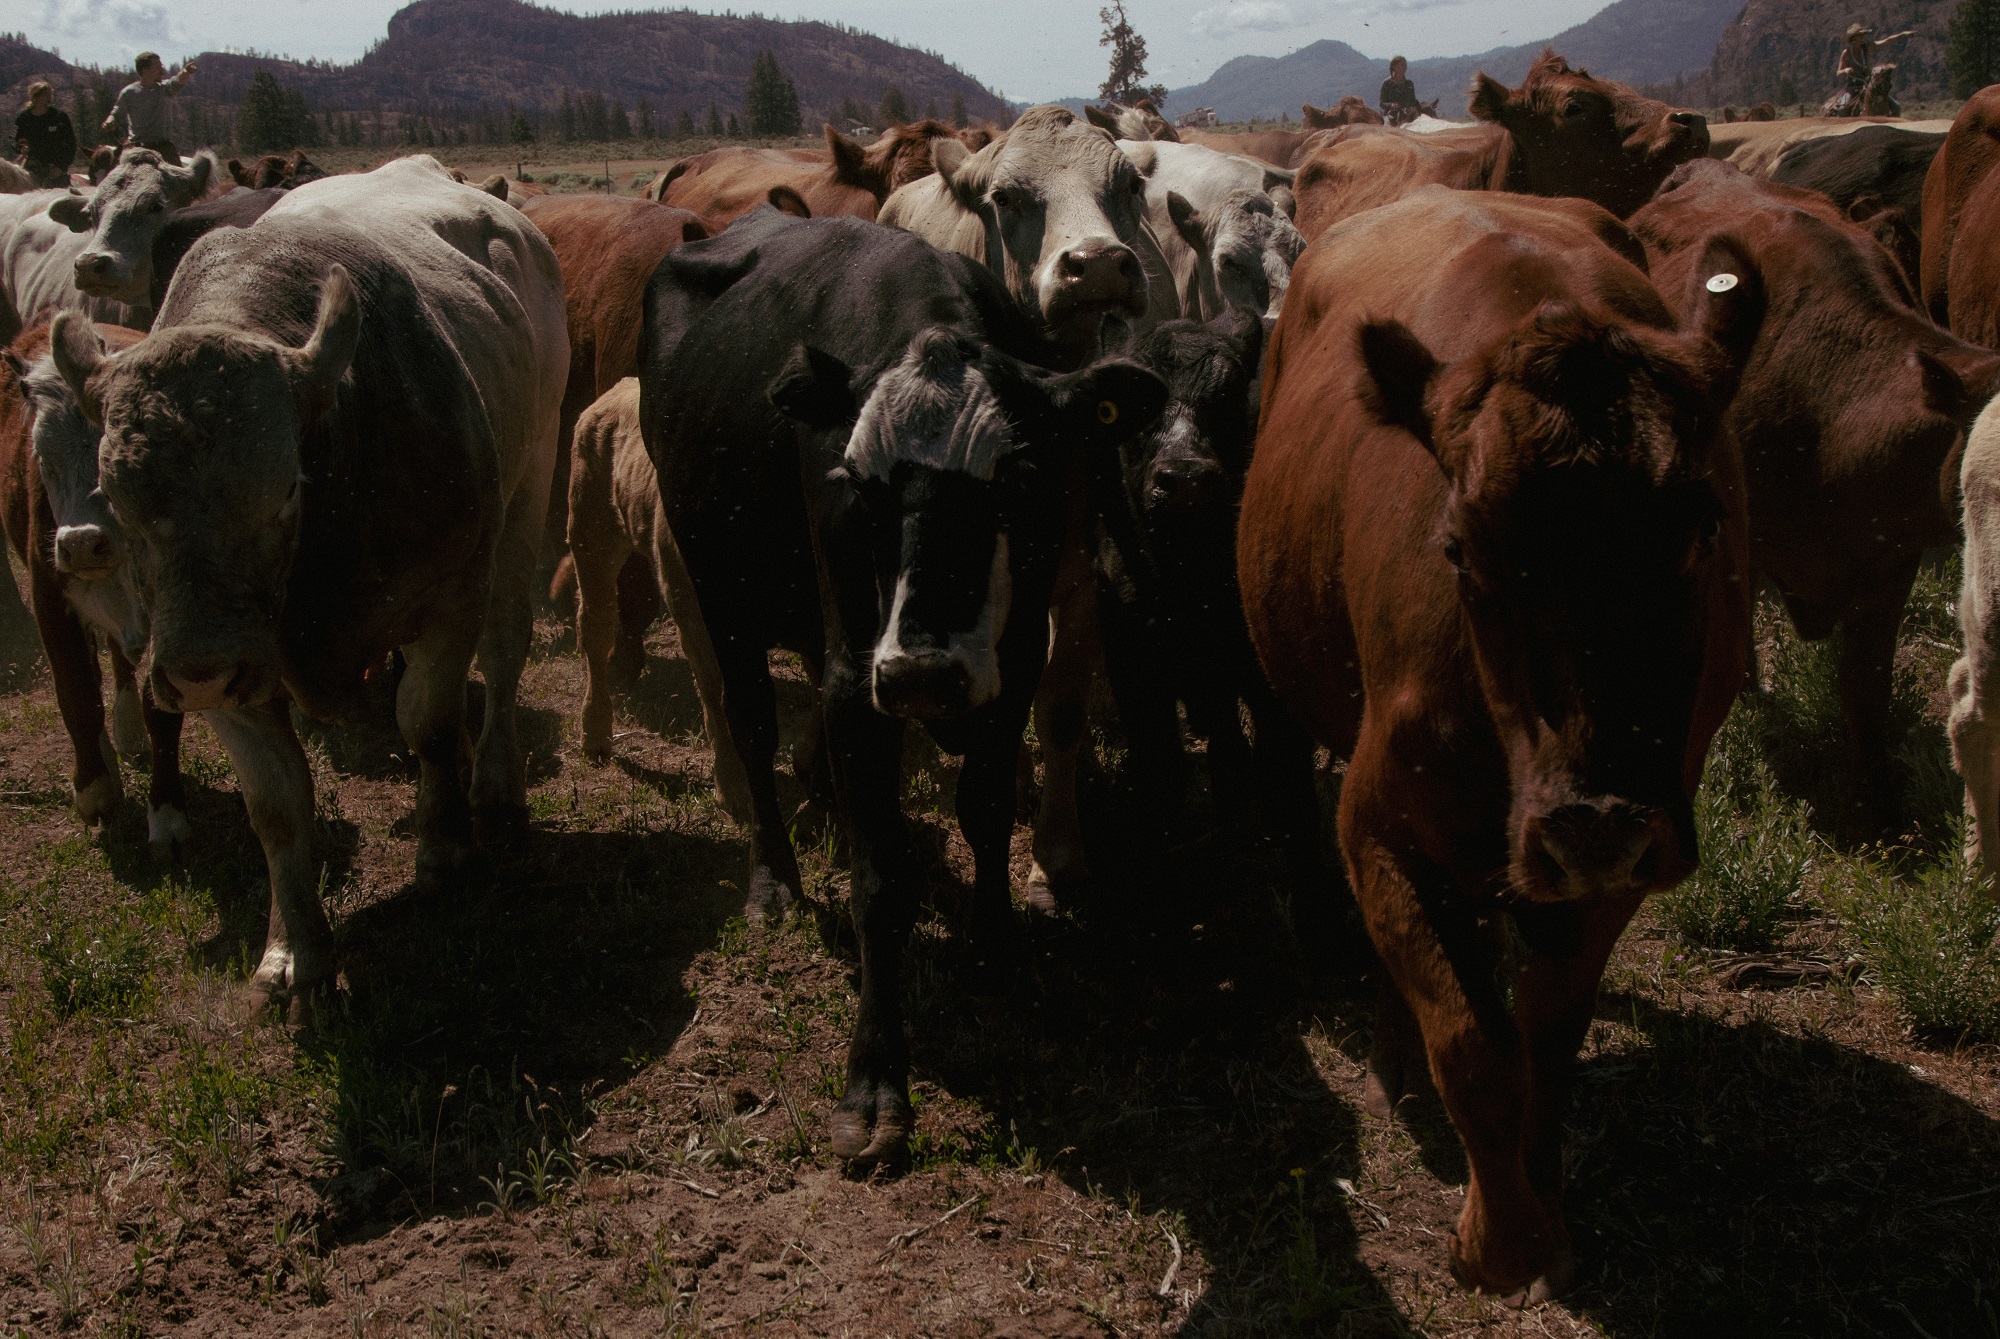 A close up of cows and they pass the camera. The cow in front is blonde with a green tag in its left ear. Behind the cows, the chest of a horse with cowboy boots in the stirrups. 